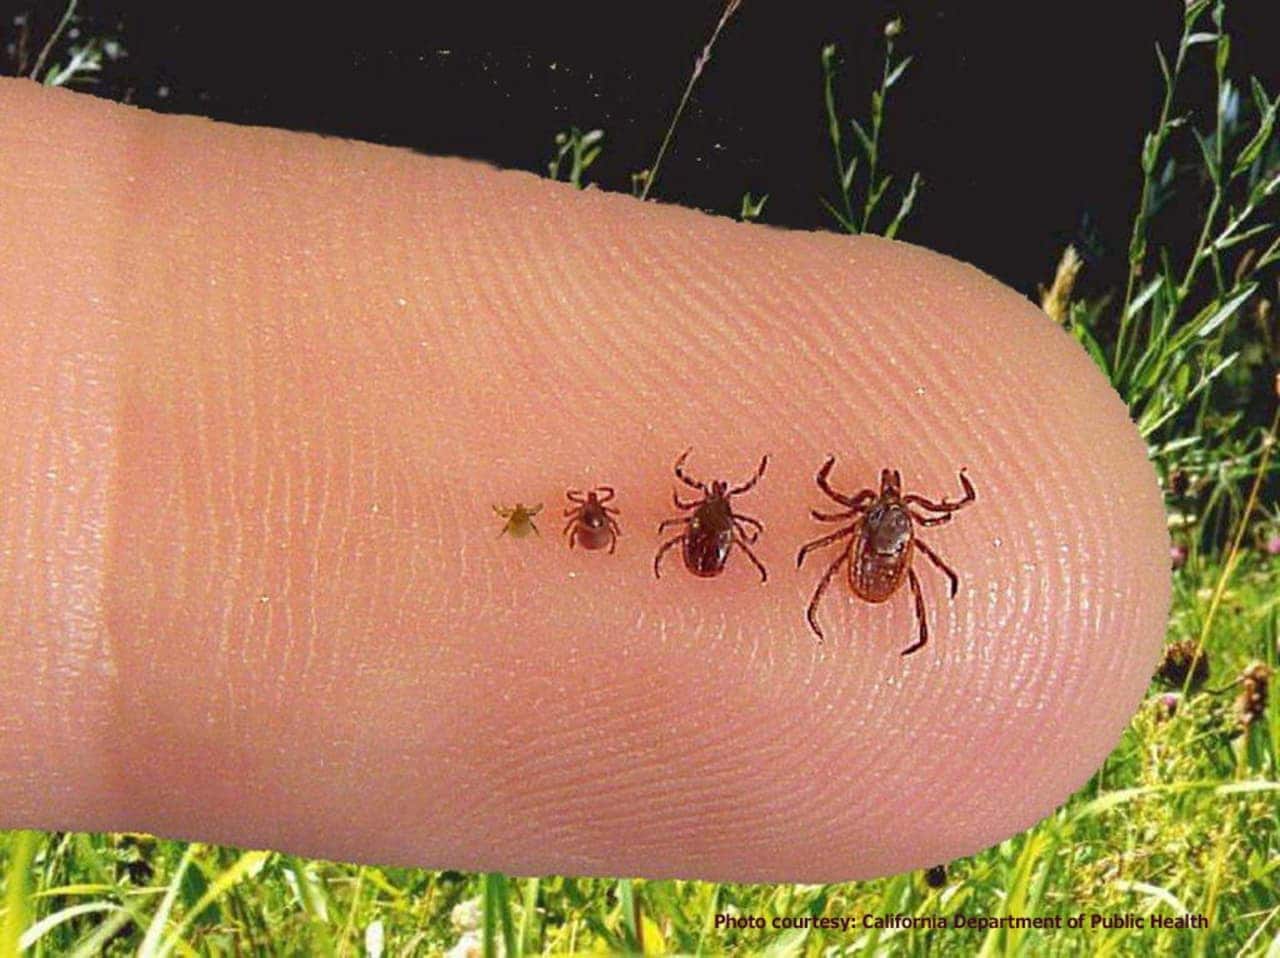 A very rare virus known as POW has been found in 22 ticks from five separate pools in upstate New York.